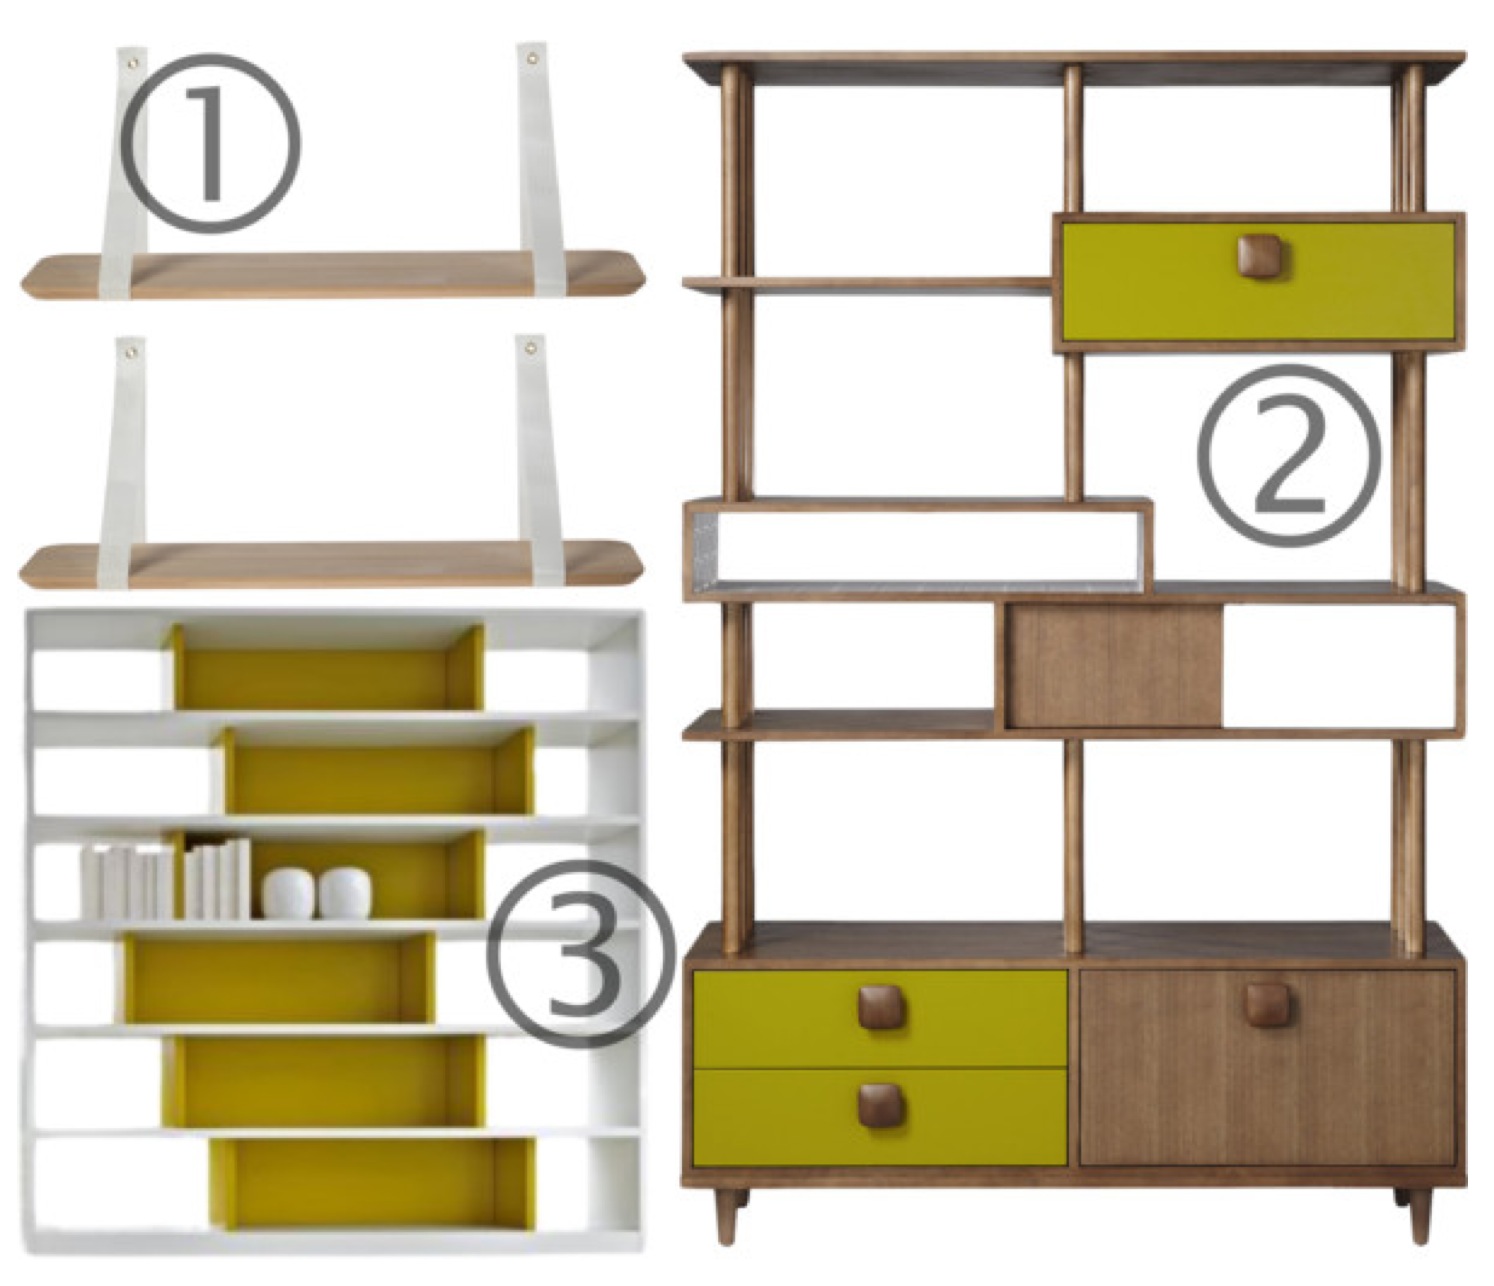 12 Shelving Units Perfect For Your Eichlereichlersocal